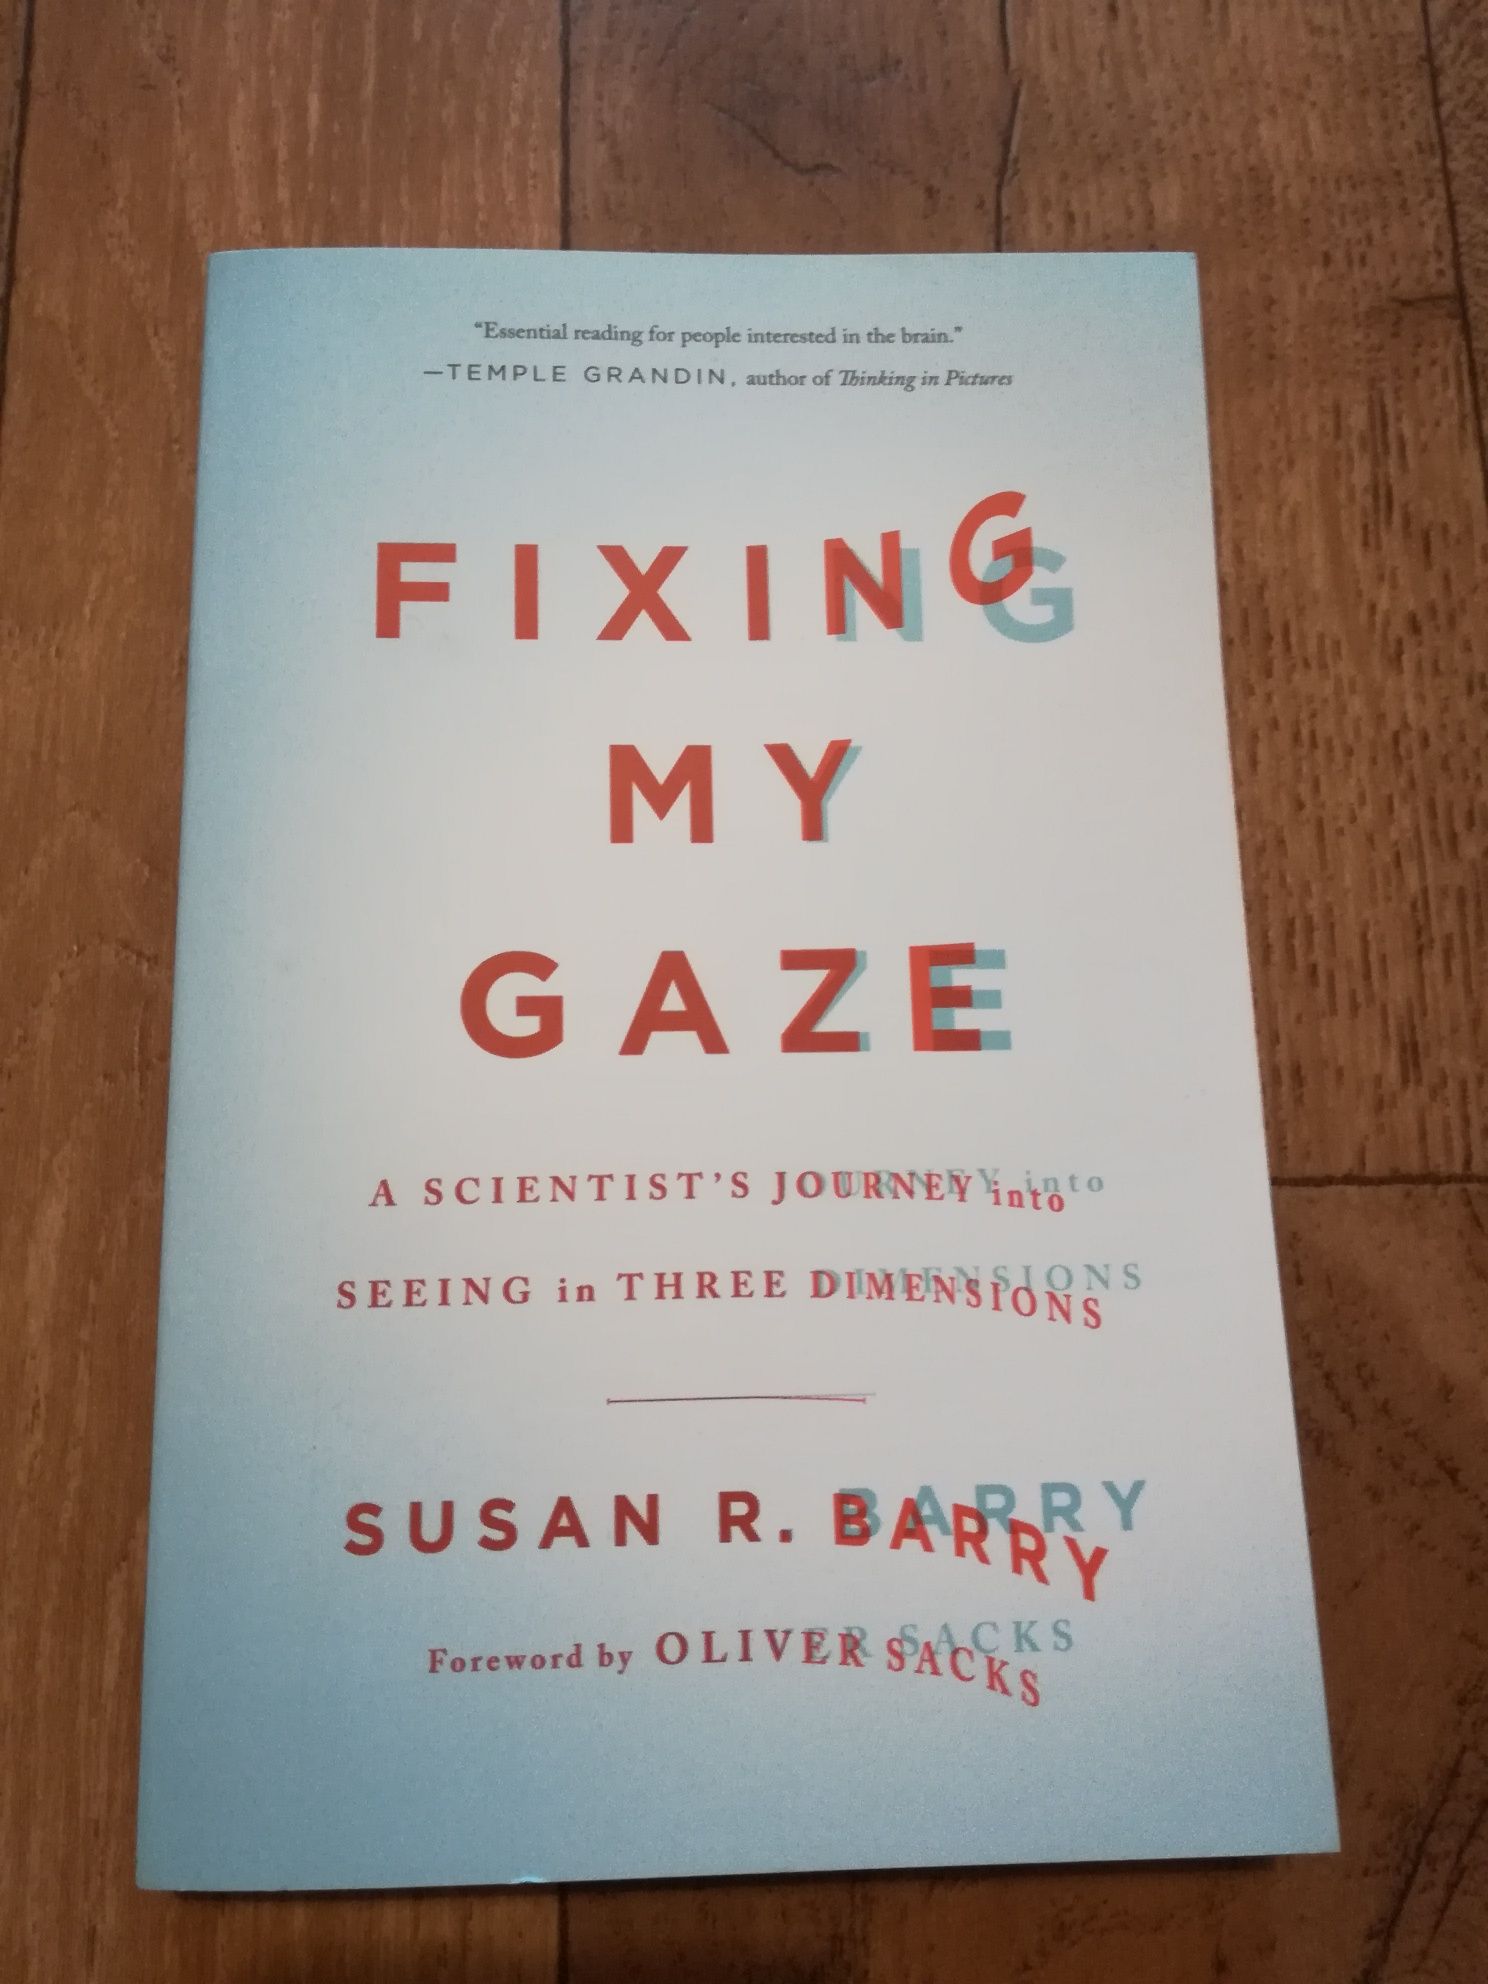 Fixing my gaze - Susan R. Barray, foreword by Olivier Sacks